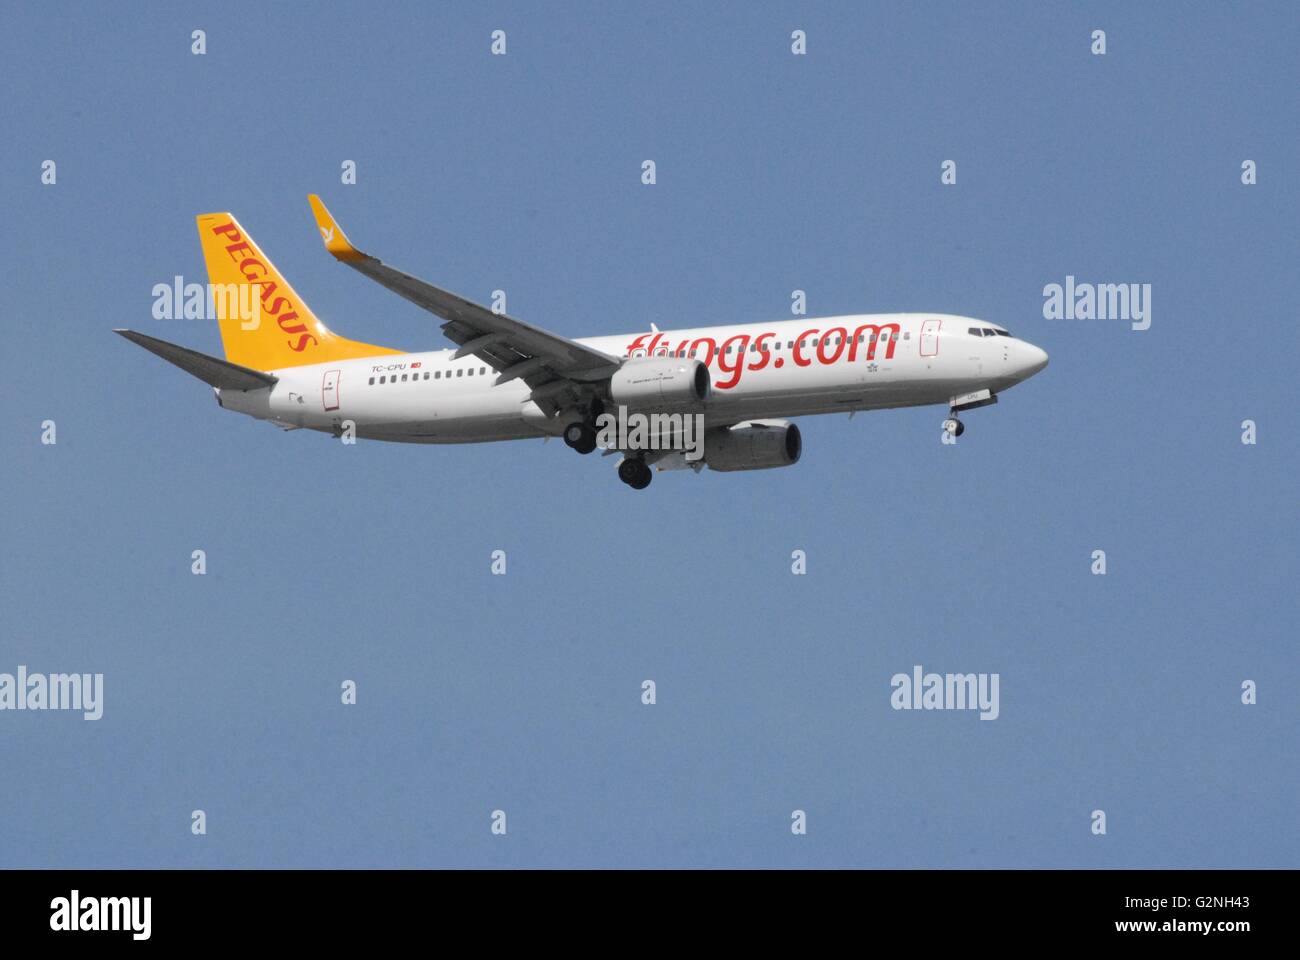 Pegasus Airlines Boeing 737-800 aircraft during the approach to Adnan Menderes Airport Stock Photo